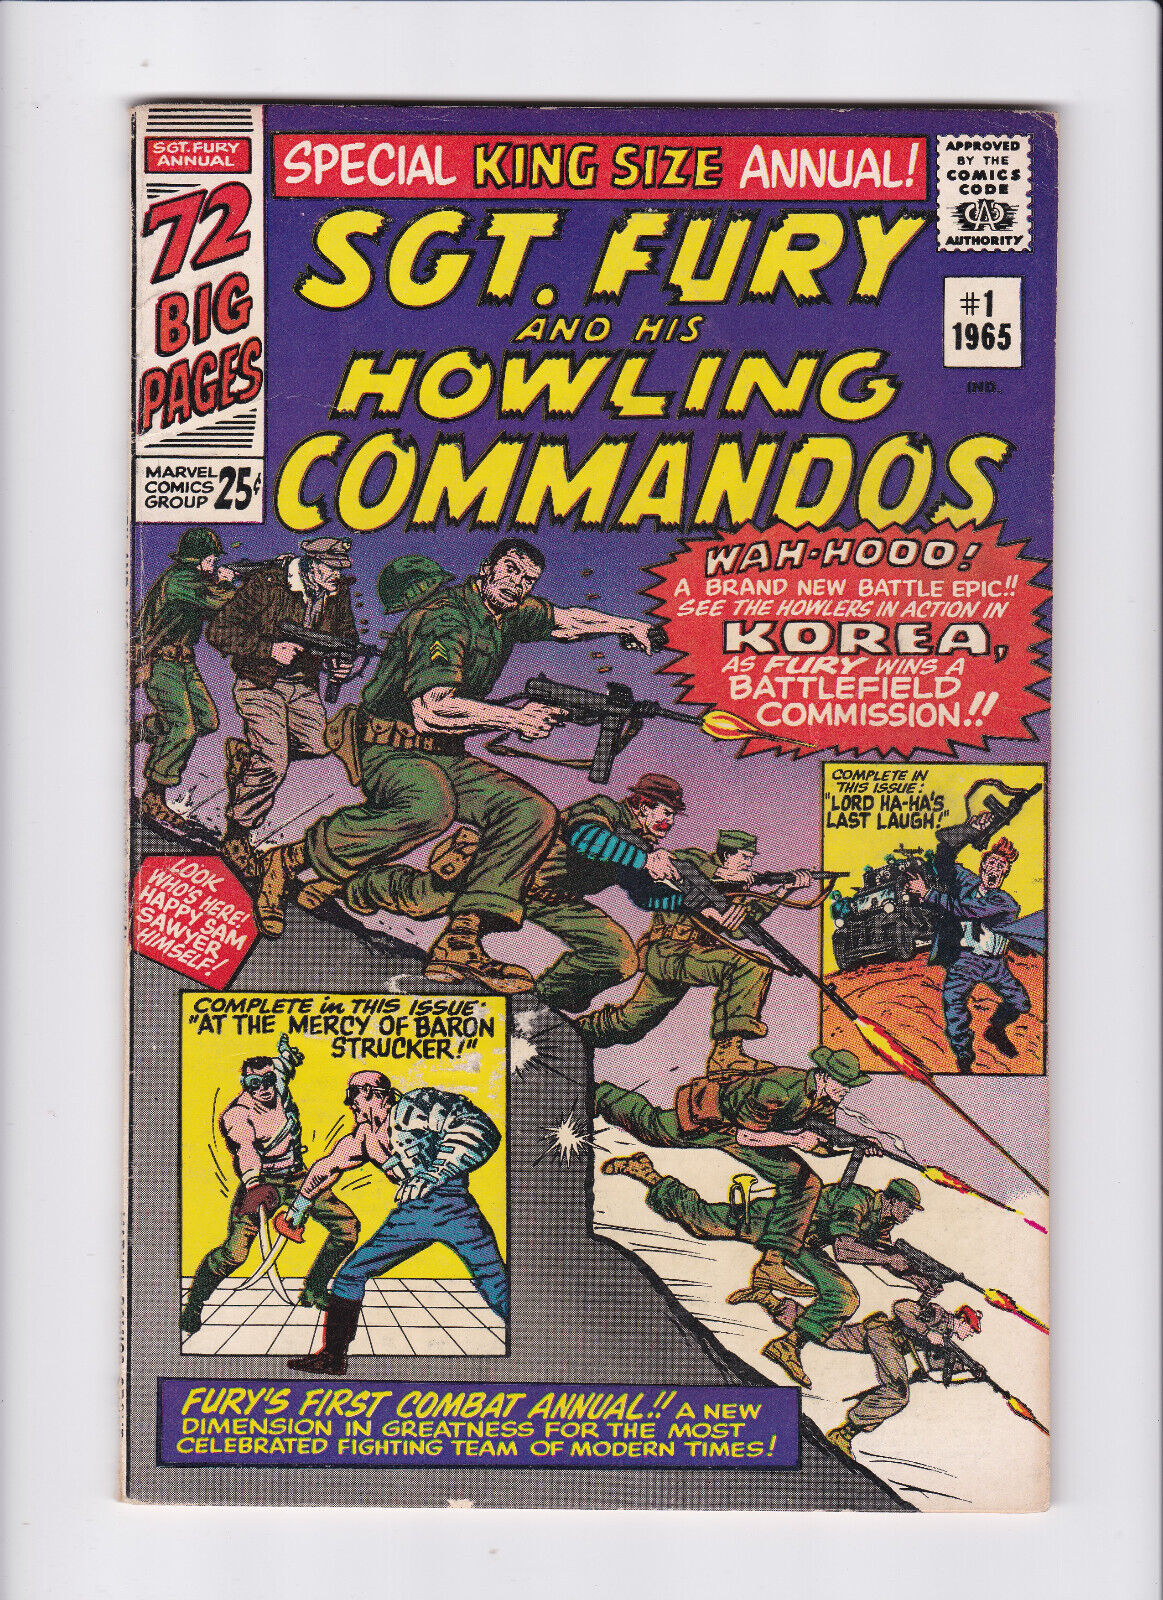 SGT. FURY ANNUAL #1 [1965 VG/FN] "COMMISSION IN KOREA!"